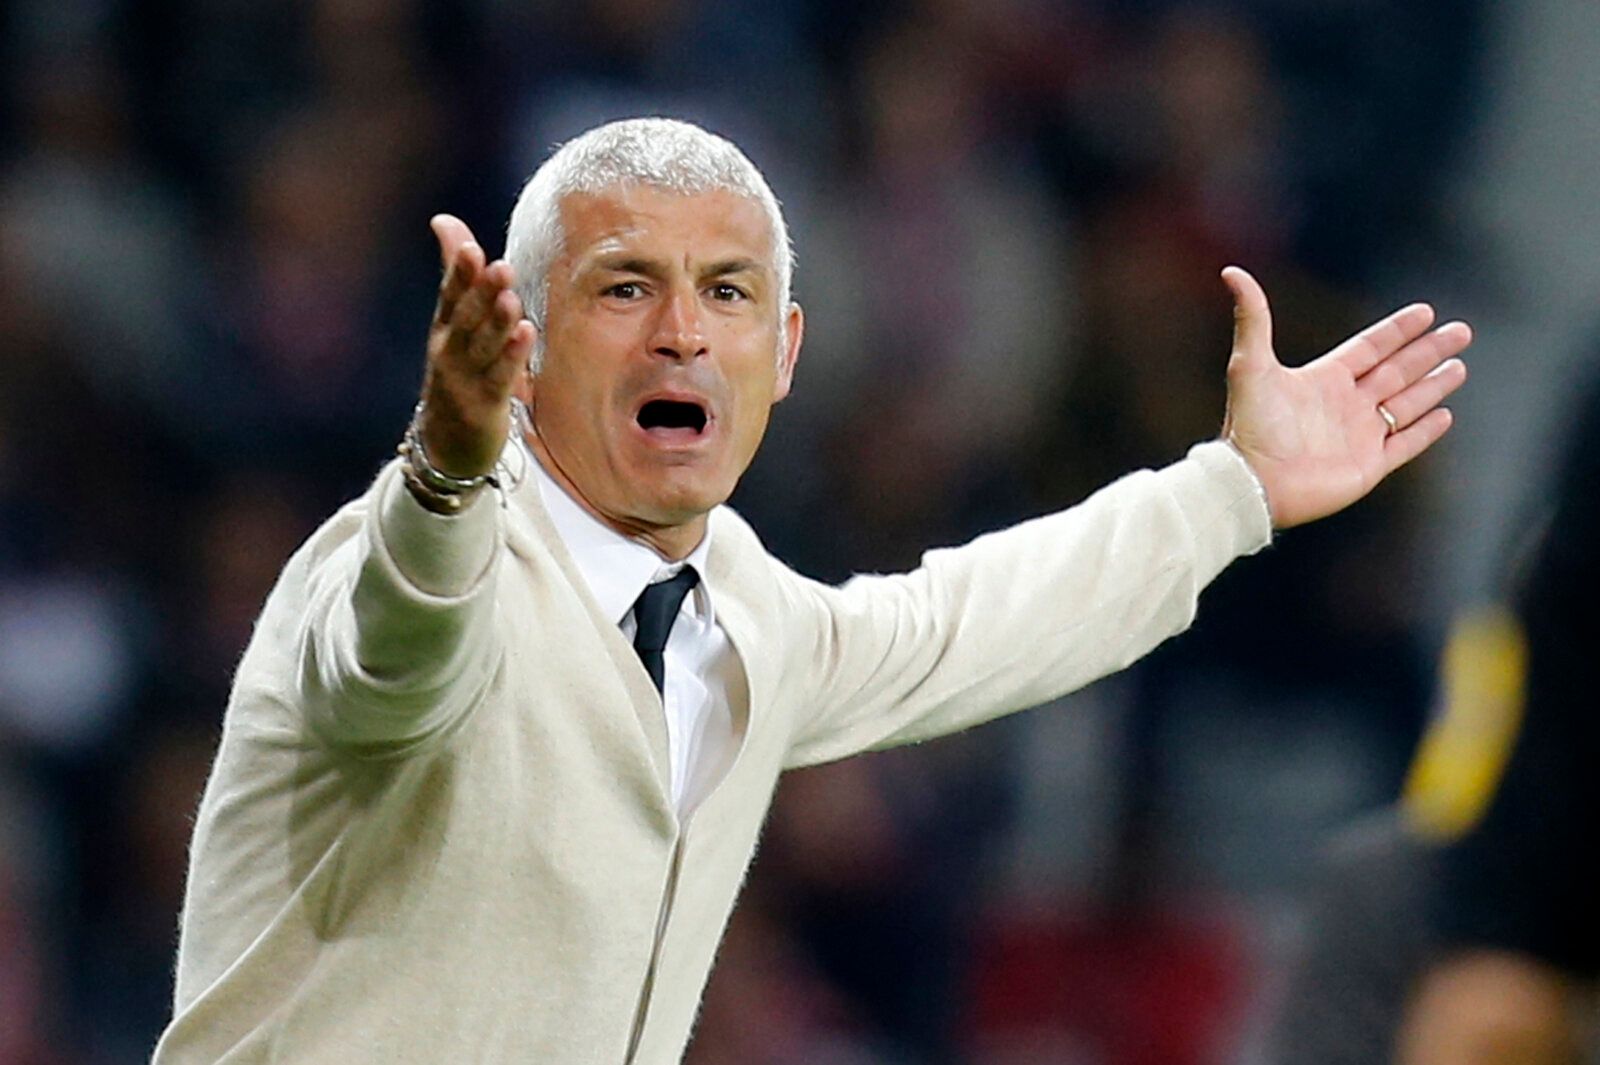 Ajaccio's coach Fabrizio Ravanelli reacts during their French Ligue 1 soccer match against Lille at the Pierre Mauroy Stadium in Villeneuve d'Ascq October 5, 2013. REUTERS/Pascal Rossignol (FRANCE - Tags: SPORT SOCCER)